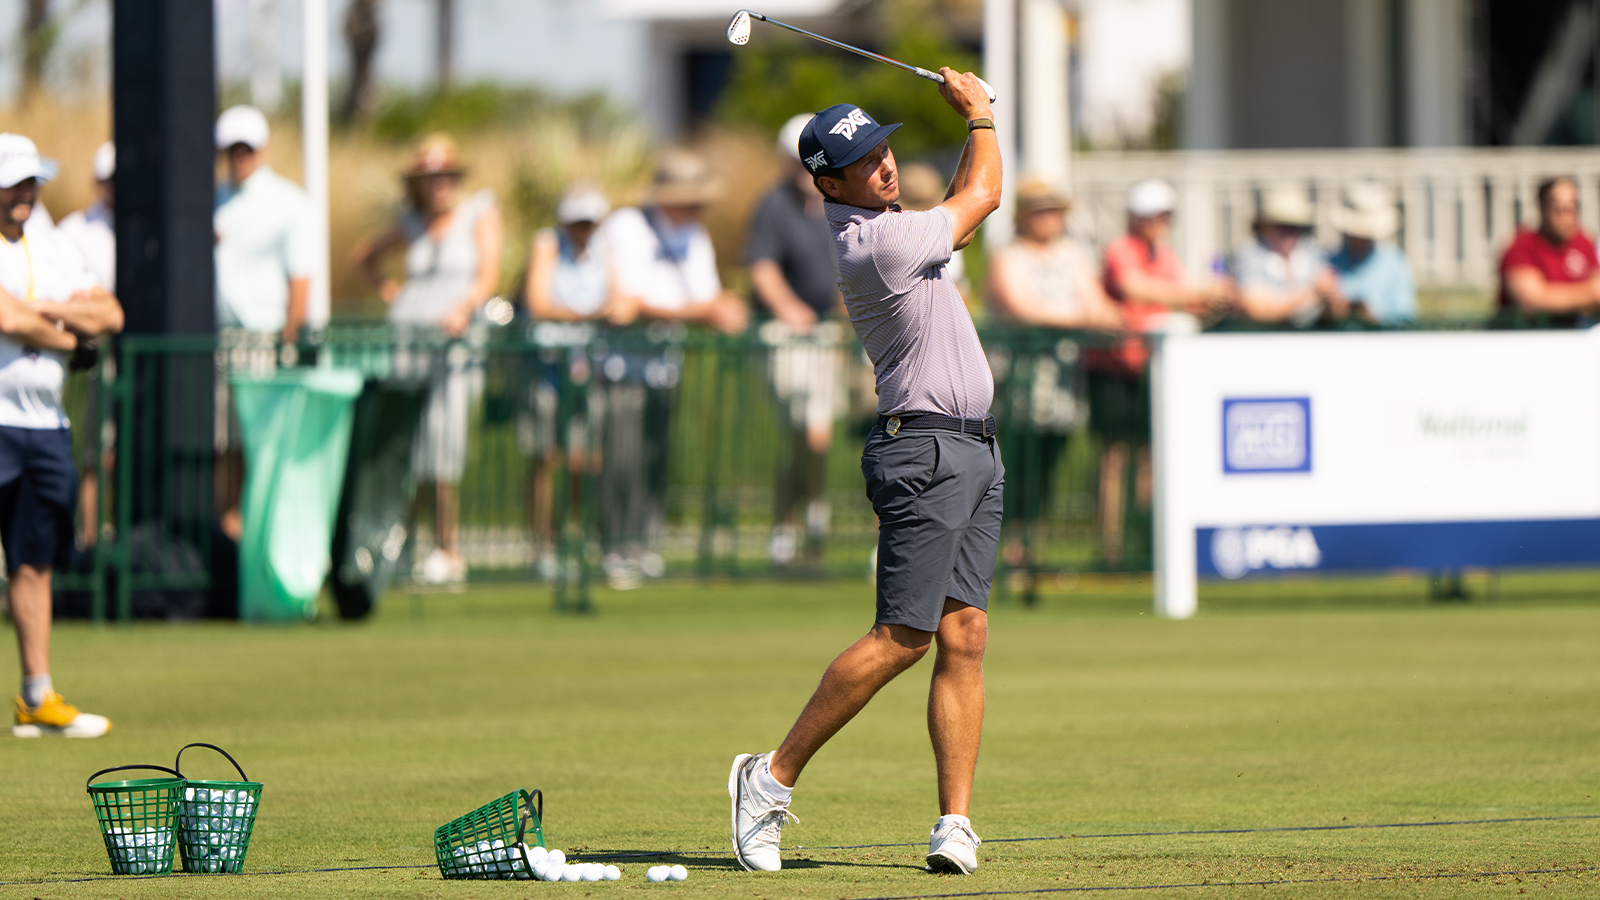 PGA Professional Ben Polland hits his shot on the driving range during a practice round for the 2021 PGA Championship held at the Ocean Course on May 17, 2021 in Kiawah Island, South Carolina. (Photo by Darren Carroll/PGA of America)